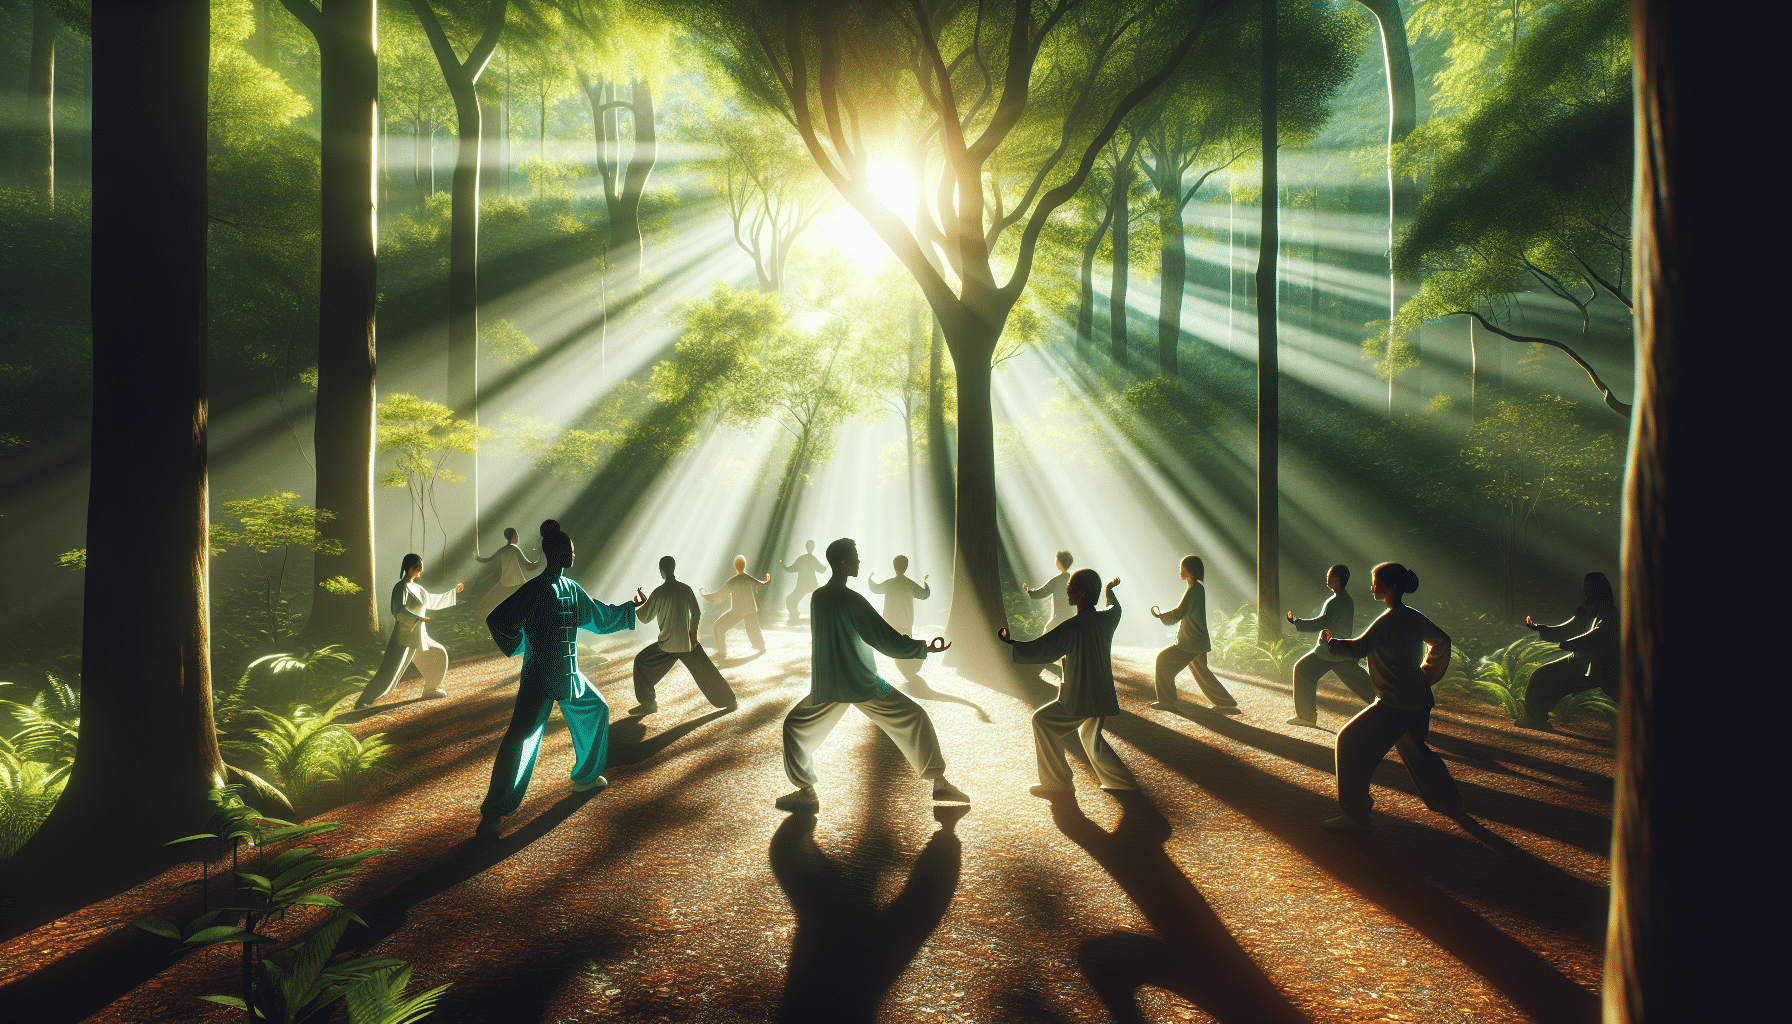 Group practicing tai chi in sun-drenched forest clearing